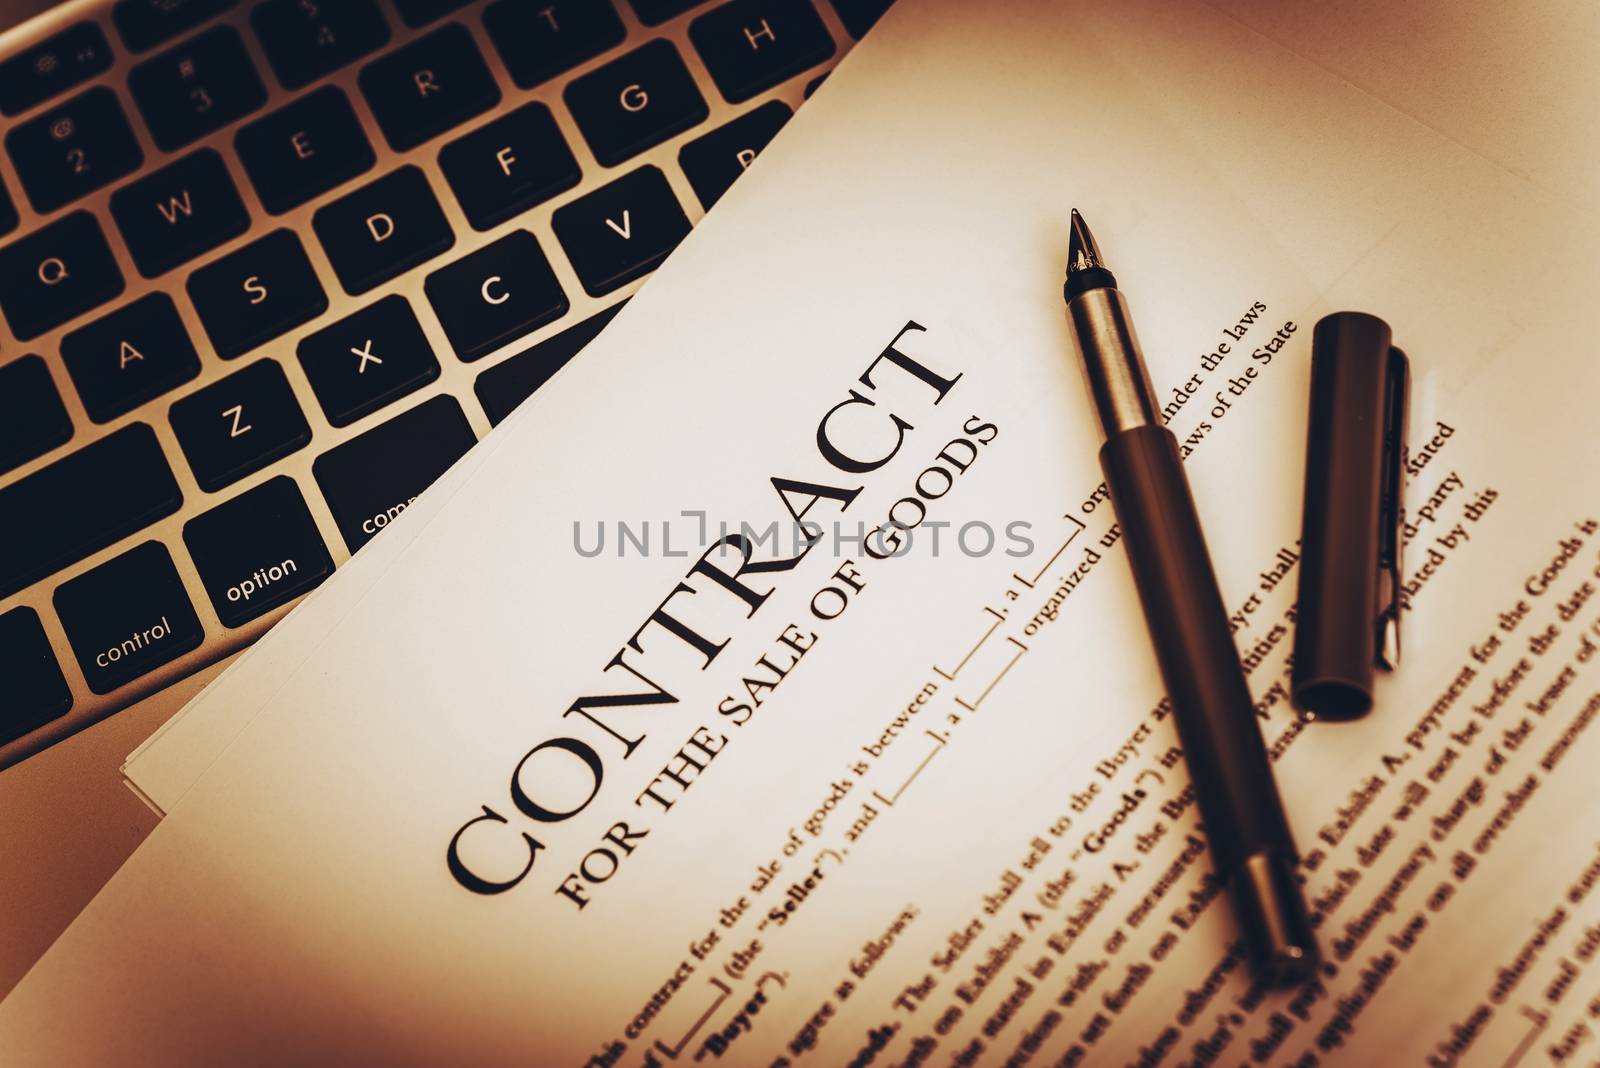 Sale of Goods Documents. Contract of Sale of Goods Closeup Photo.